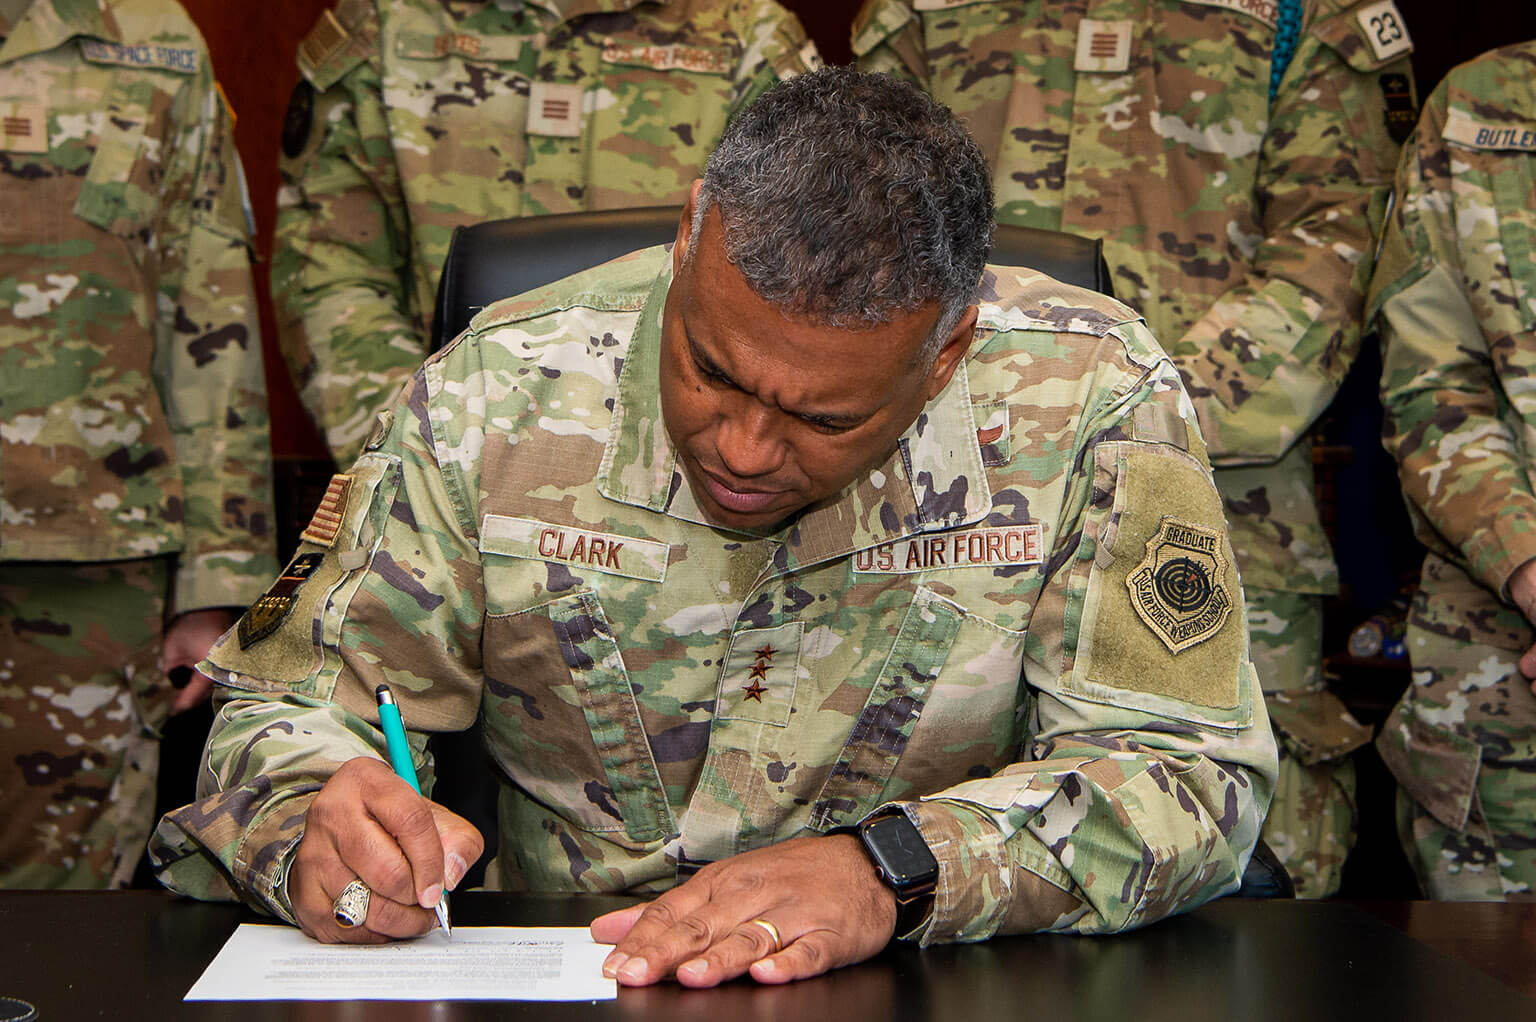 Lt. Gen. Richard Clark, U.S. Air Force Academy superintendent, signs the Encouraged to Report policy memo